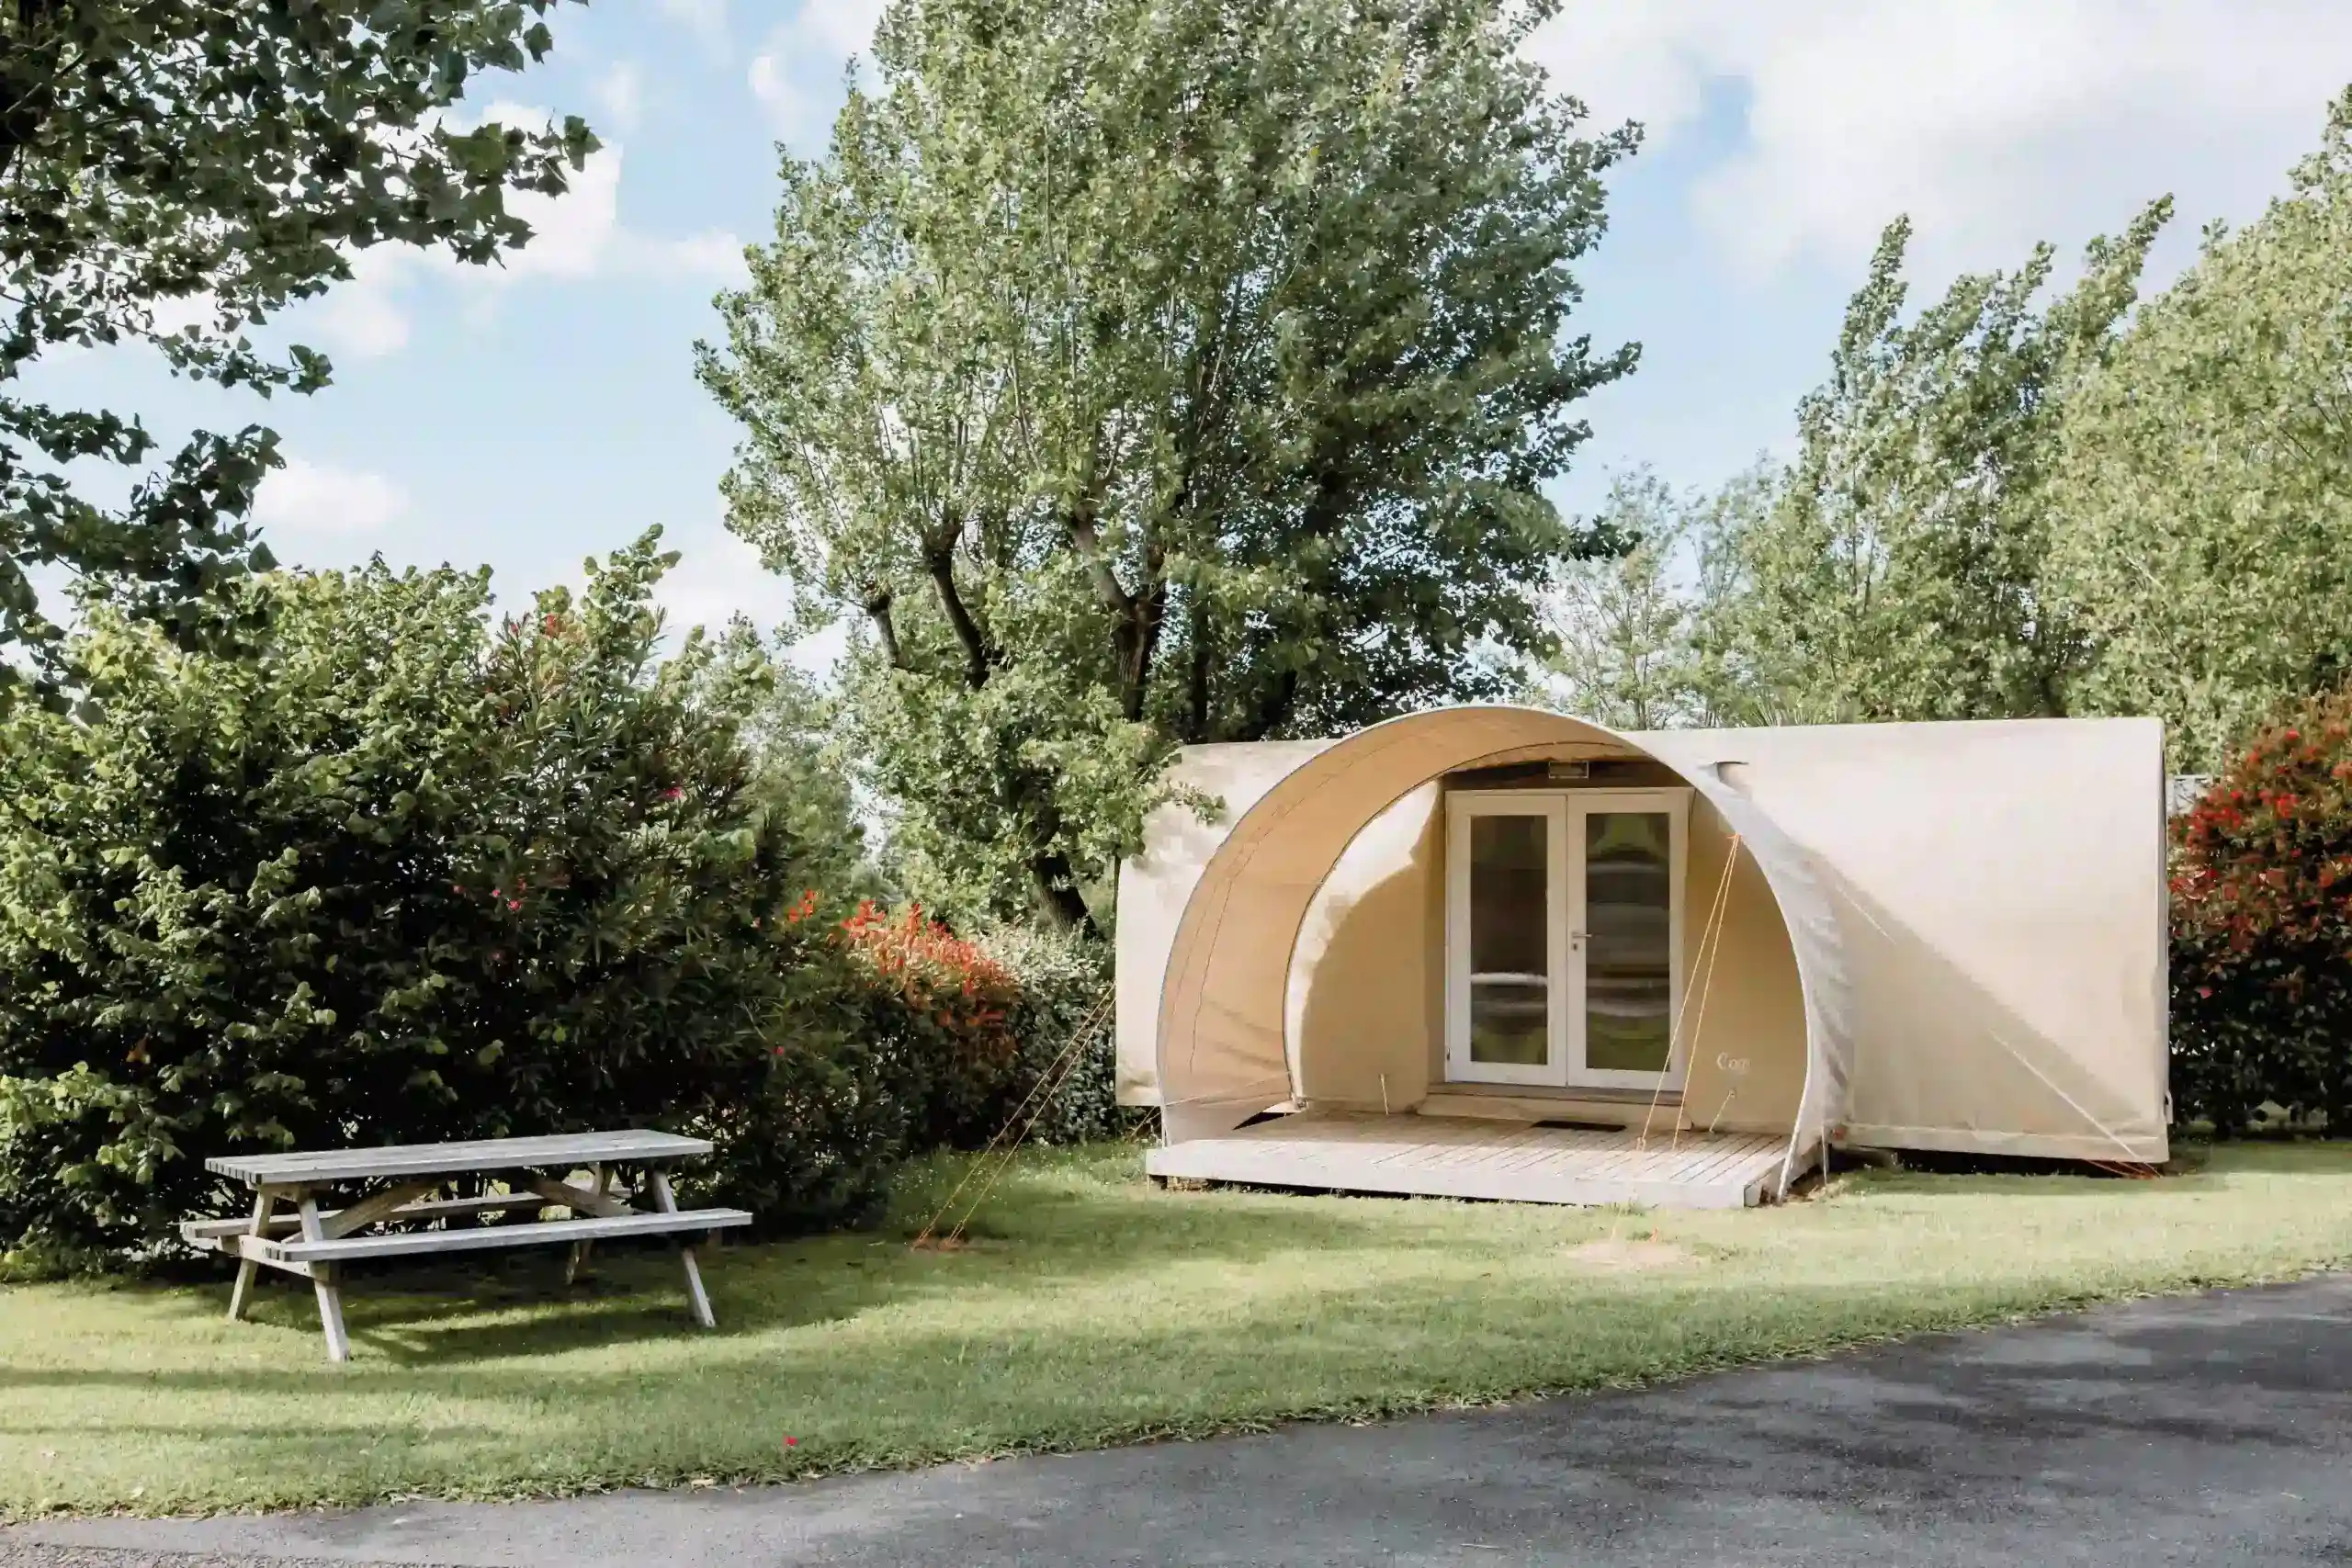 location pays basque cocosweet nature harmonie camping ametza